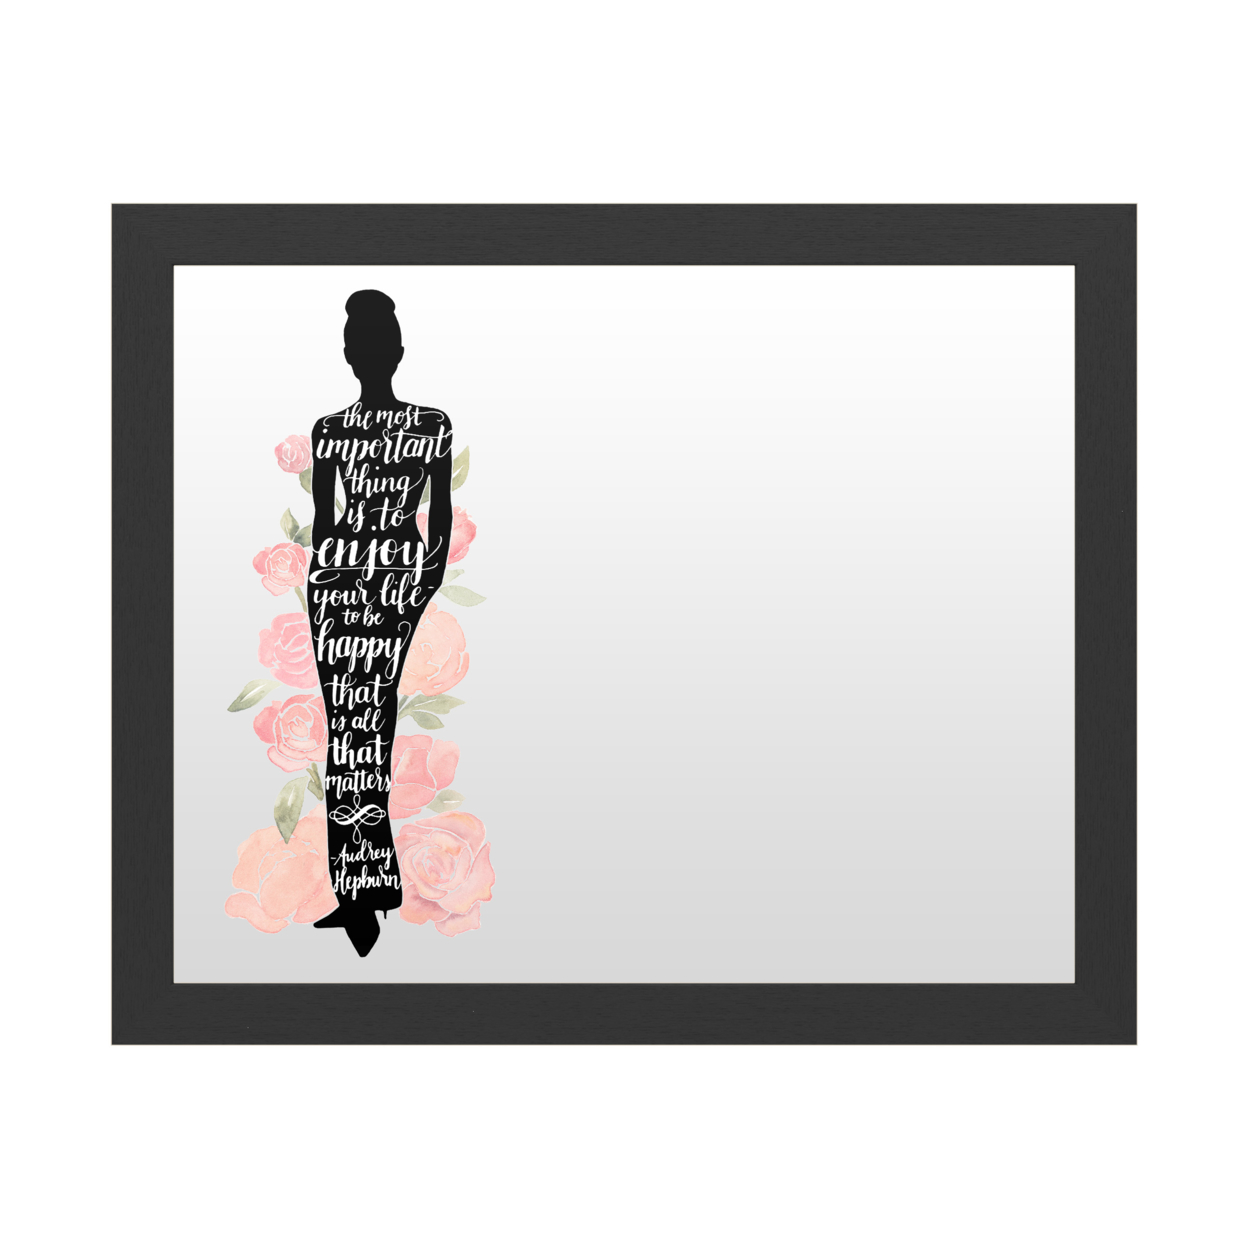 Dry Erase 16 X 20 Marker Board With Printed Artwork - Grace Popp Iconic Woman Iii White Board - Ready To Hang